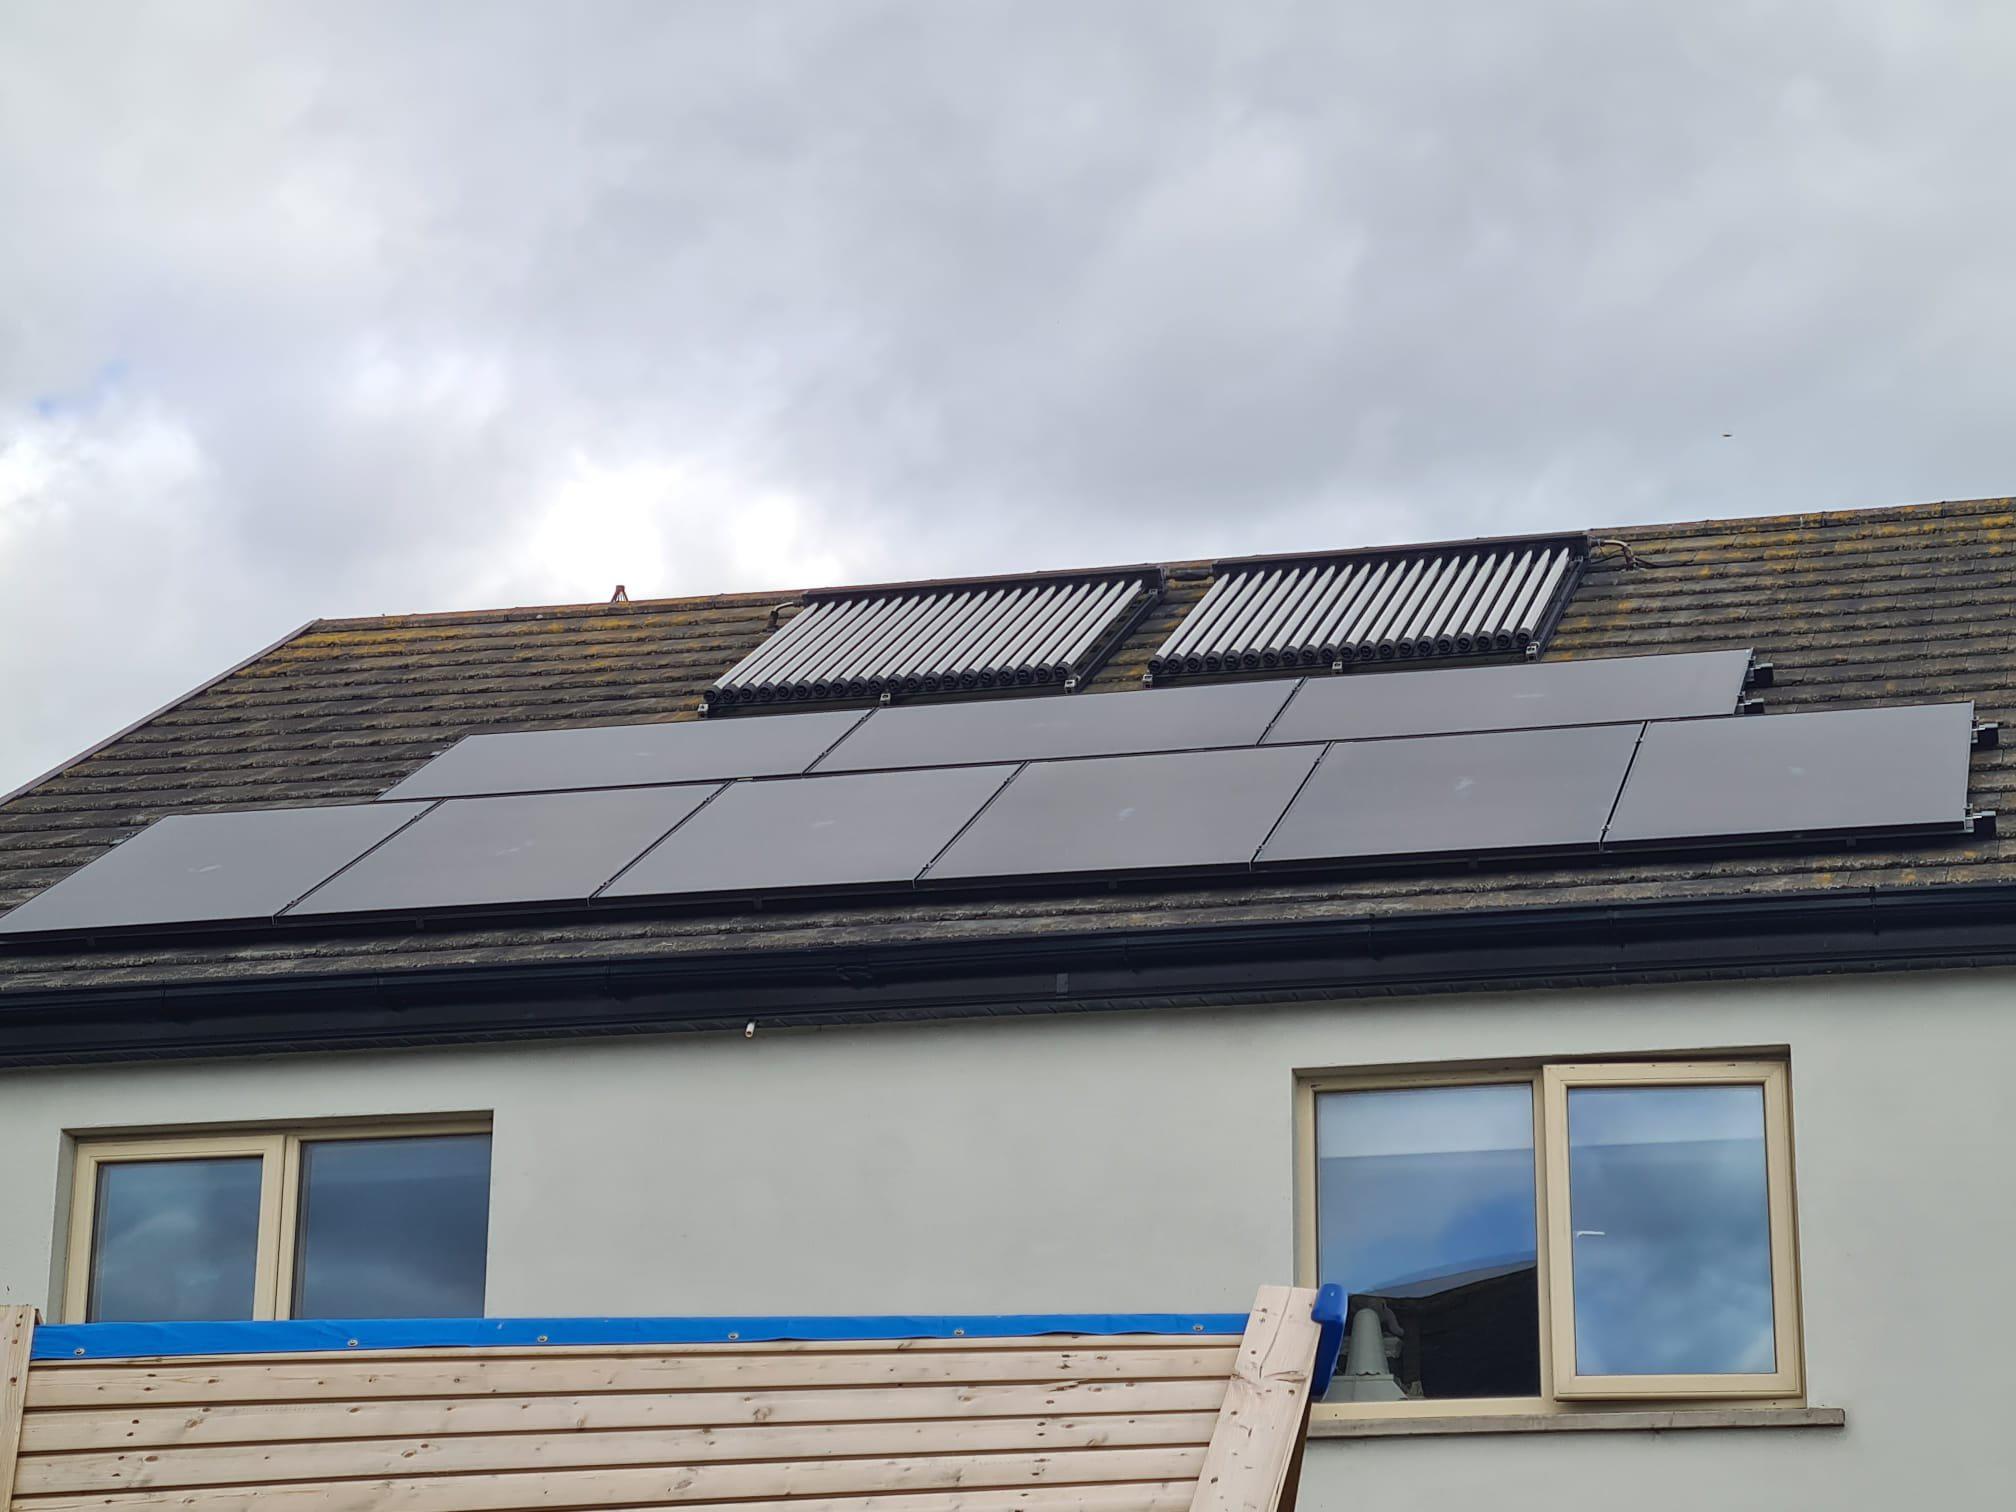 Air Source Heat Pumps
Solar Photovoltaic Panels
Solar Thermal panels
High Efficiency Gas Boilers
Und Home Energy Assist Dublin (01) 961 4609